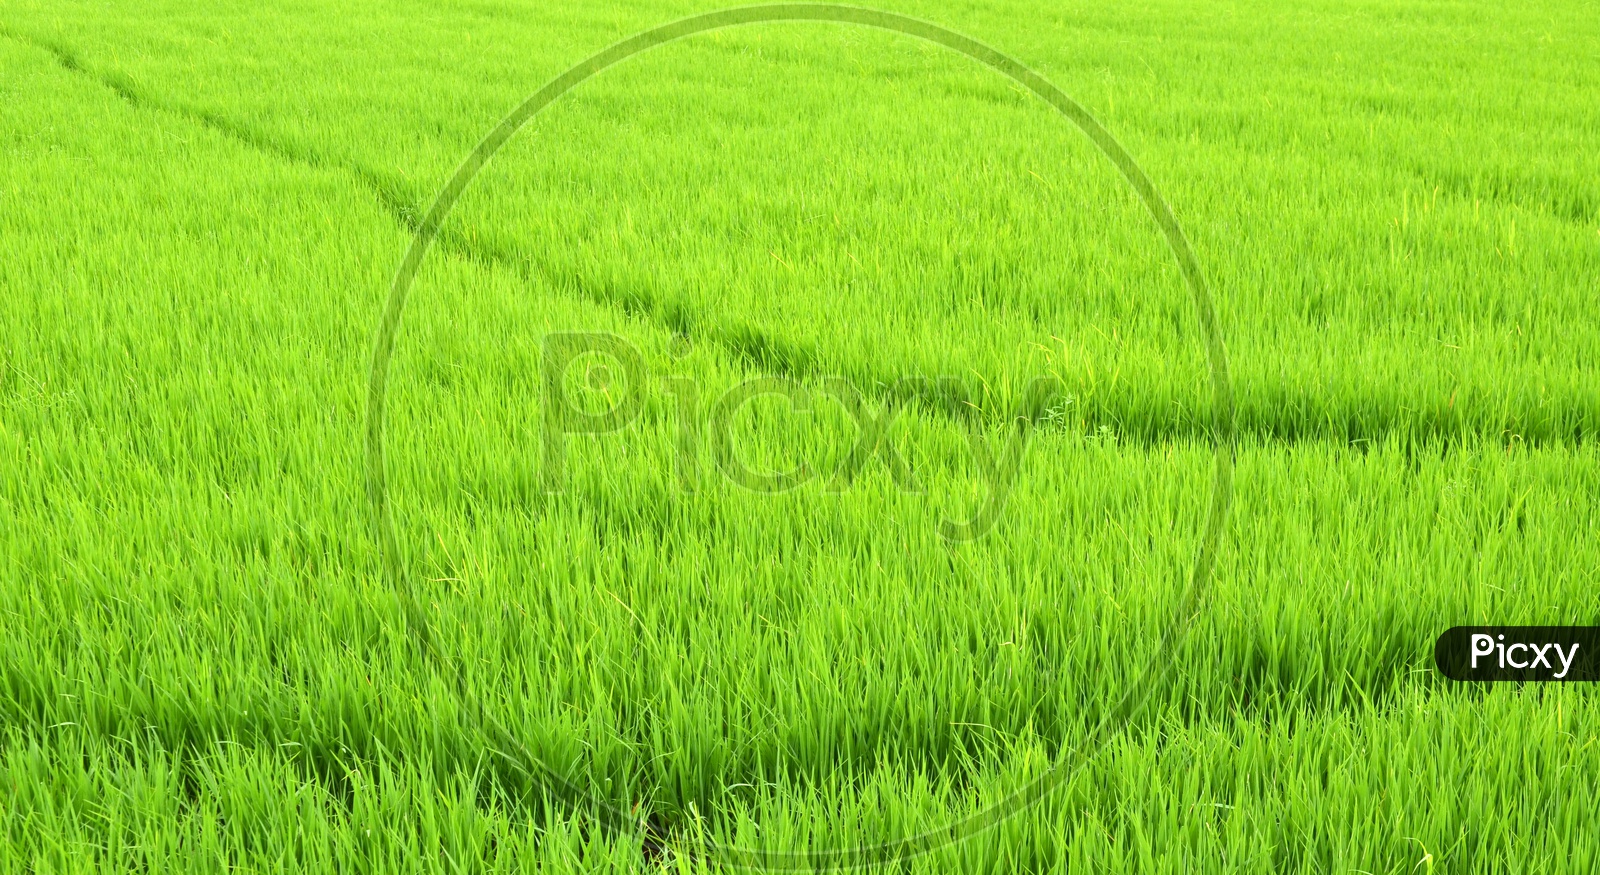 Paddy Or Rice Fields With Young Paddy Saplings  Closeup Forming a Background